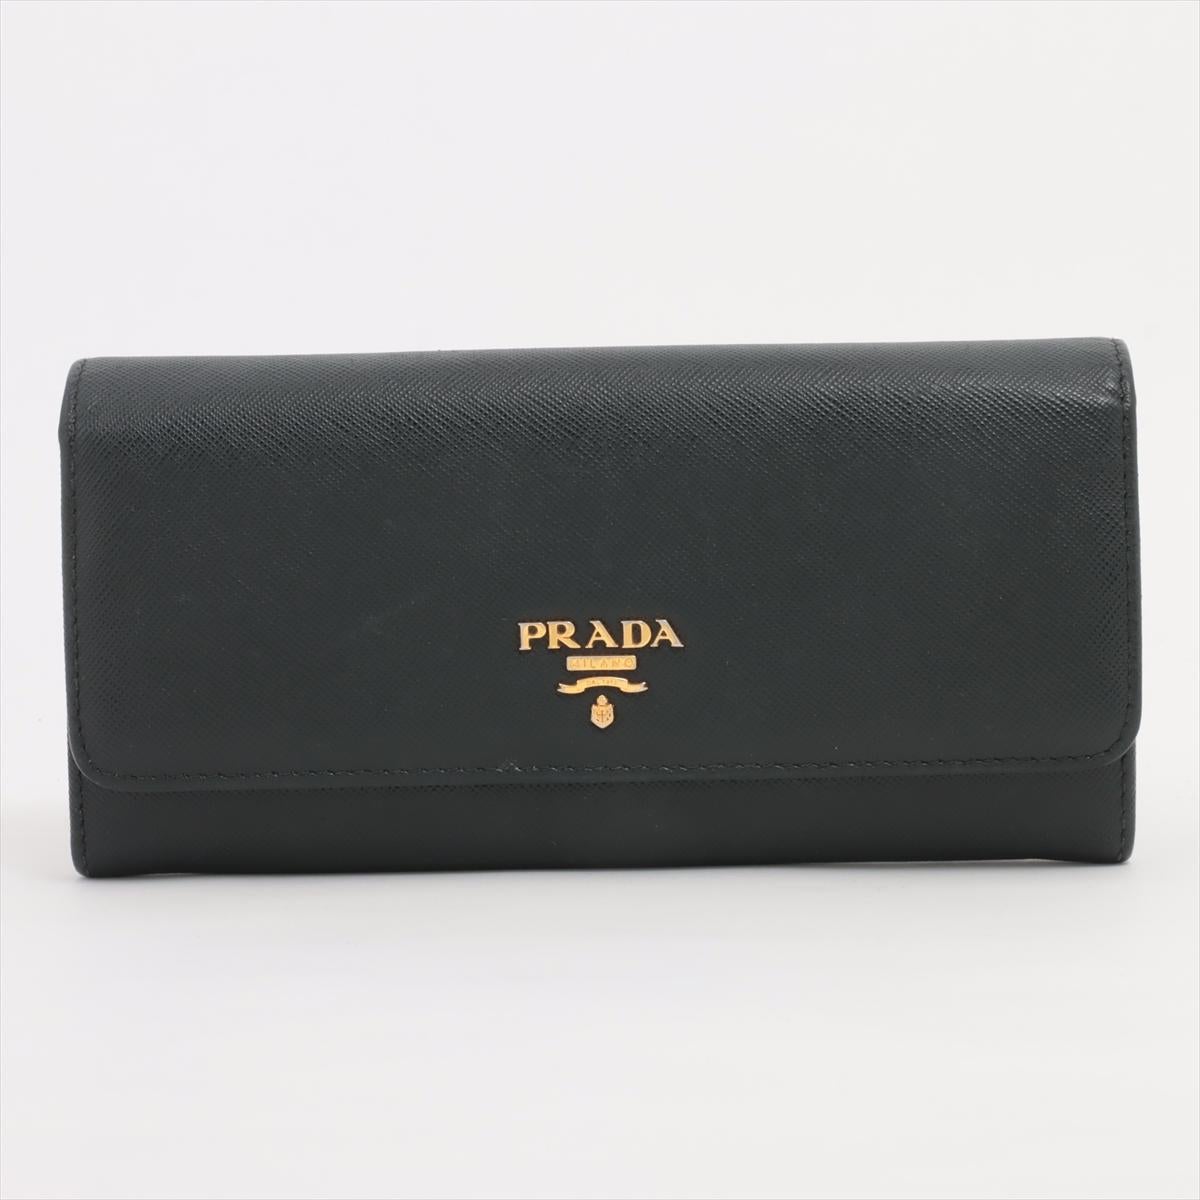 The Prada Saffiano Leather Long Wallet in Black is a sophisticated and timeless accessory crafted from high-quality Saffiano leather. Renowned for its durability and distinctive crosshatch texture, Saffiano leather adds a luxurious touch to the